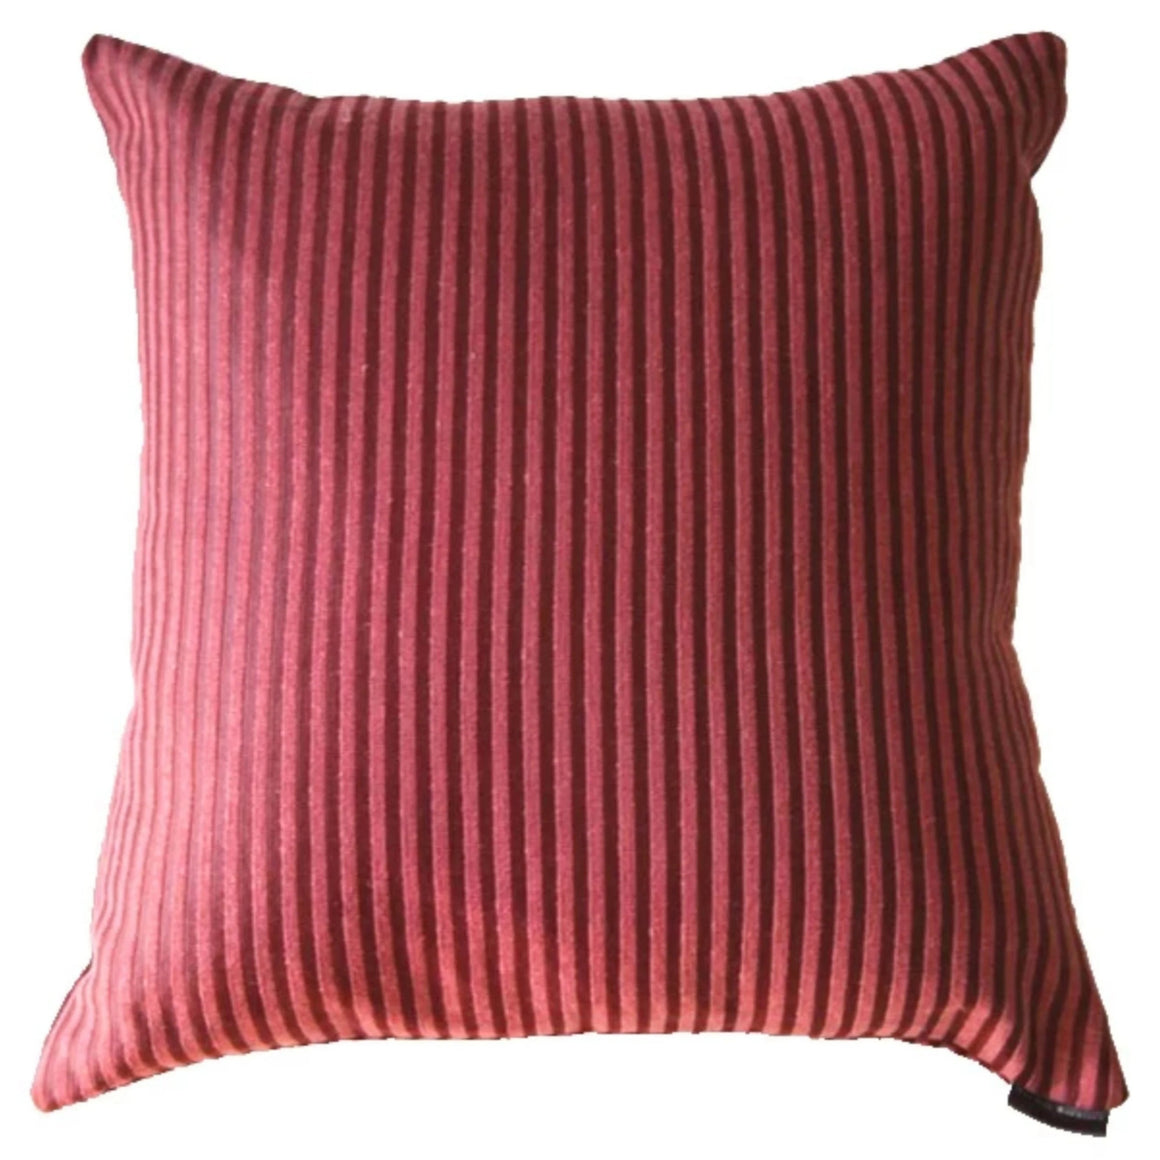 Aosta - Red Stripped Pillow Covers - Set of 3 - 1 (24” X 24”) + 2 (20” X 20”) - Maa-Kal Boutique Canada